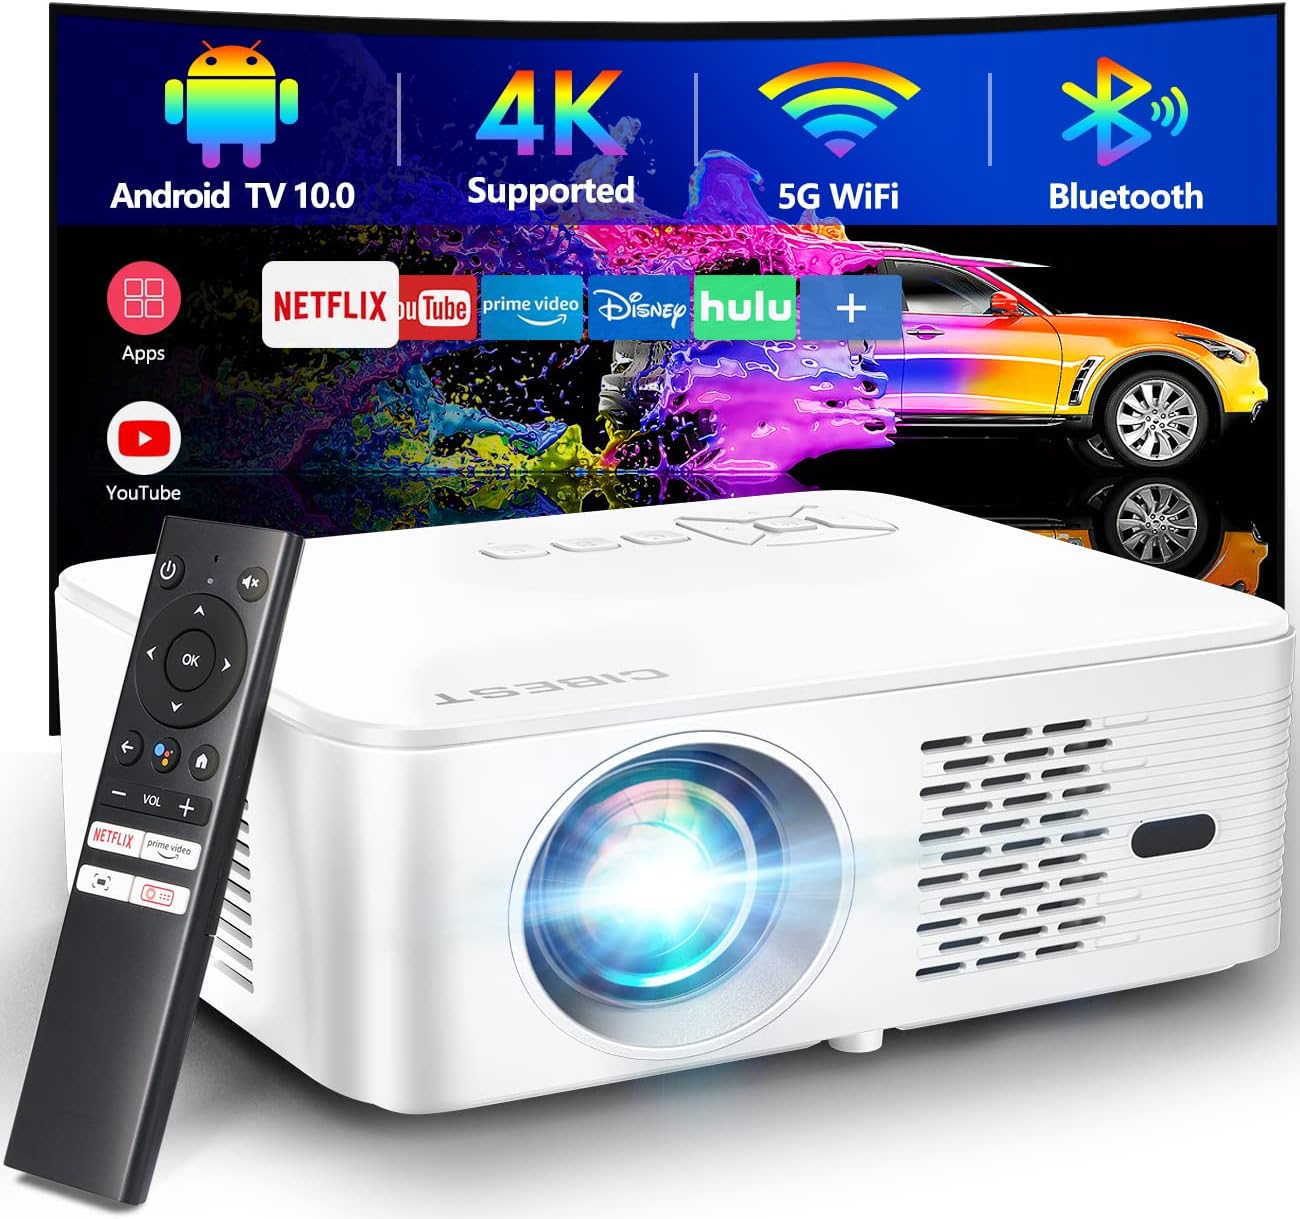 4K Support Android TV 10.0 Projector 5G WiFi Bluetooth Native 1080P